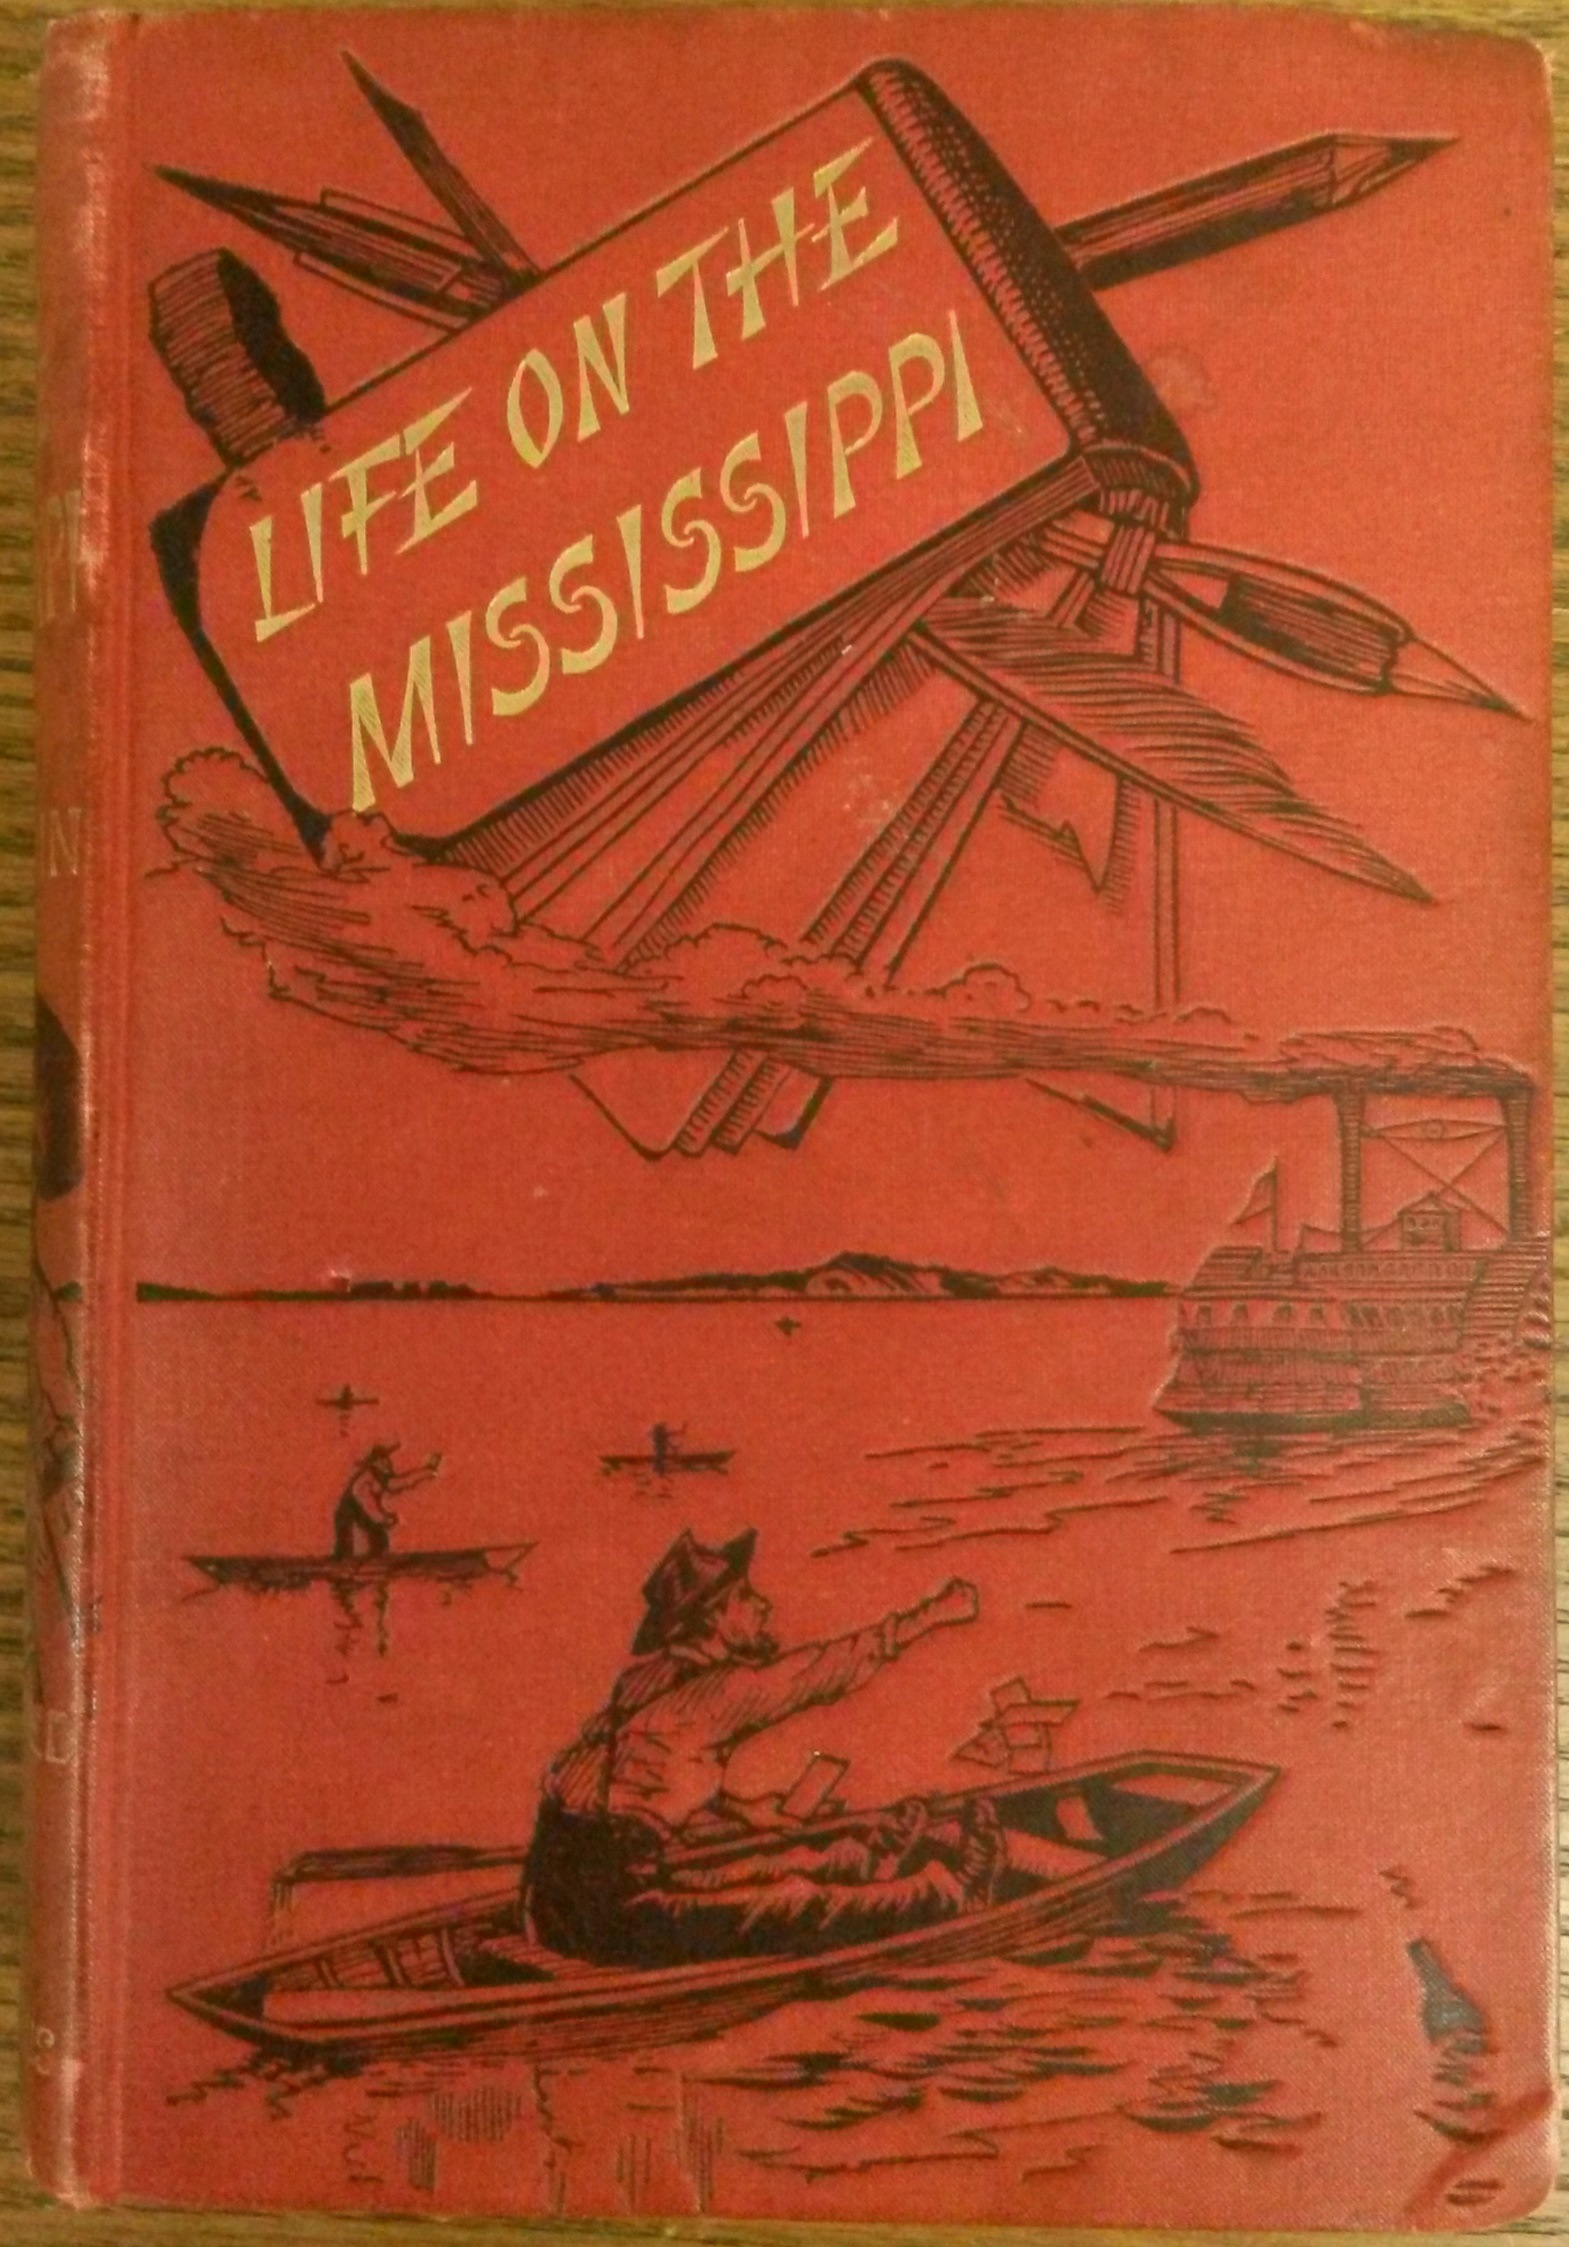 Publisher's Binding stamped with illustration of man in a rowboat, with a steamship in the background